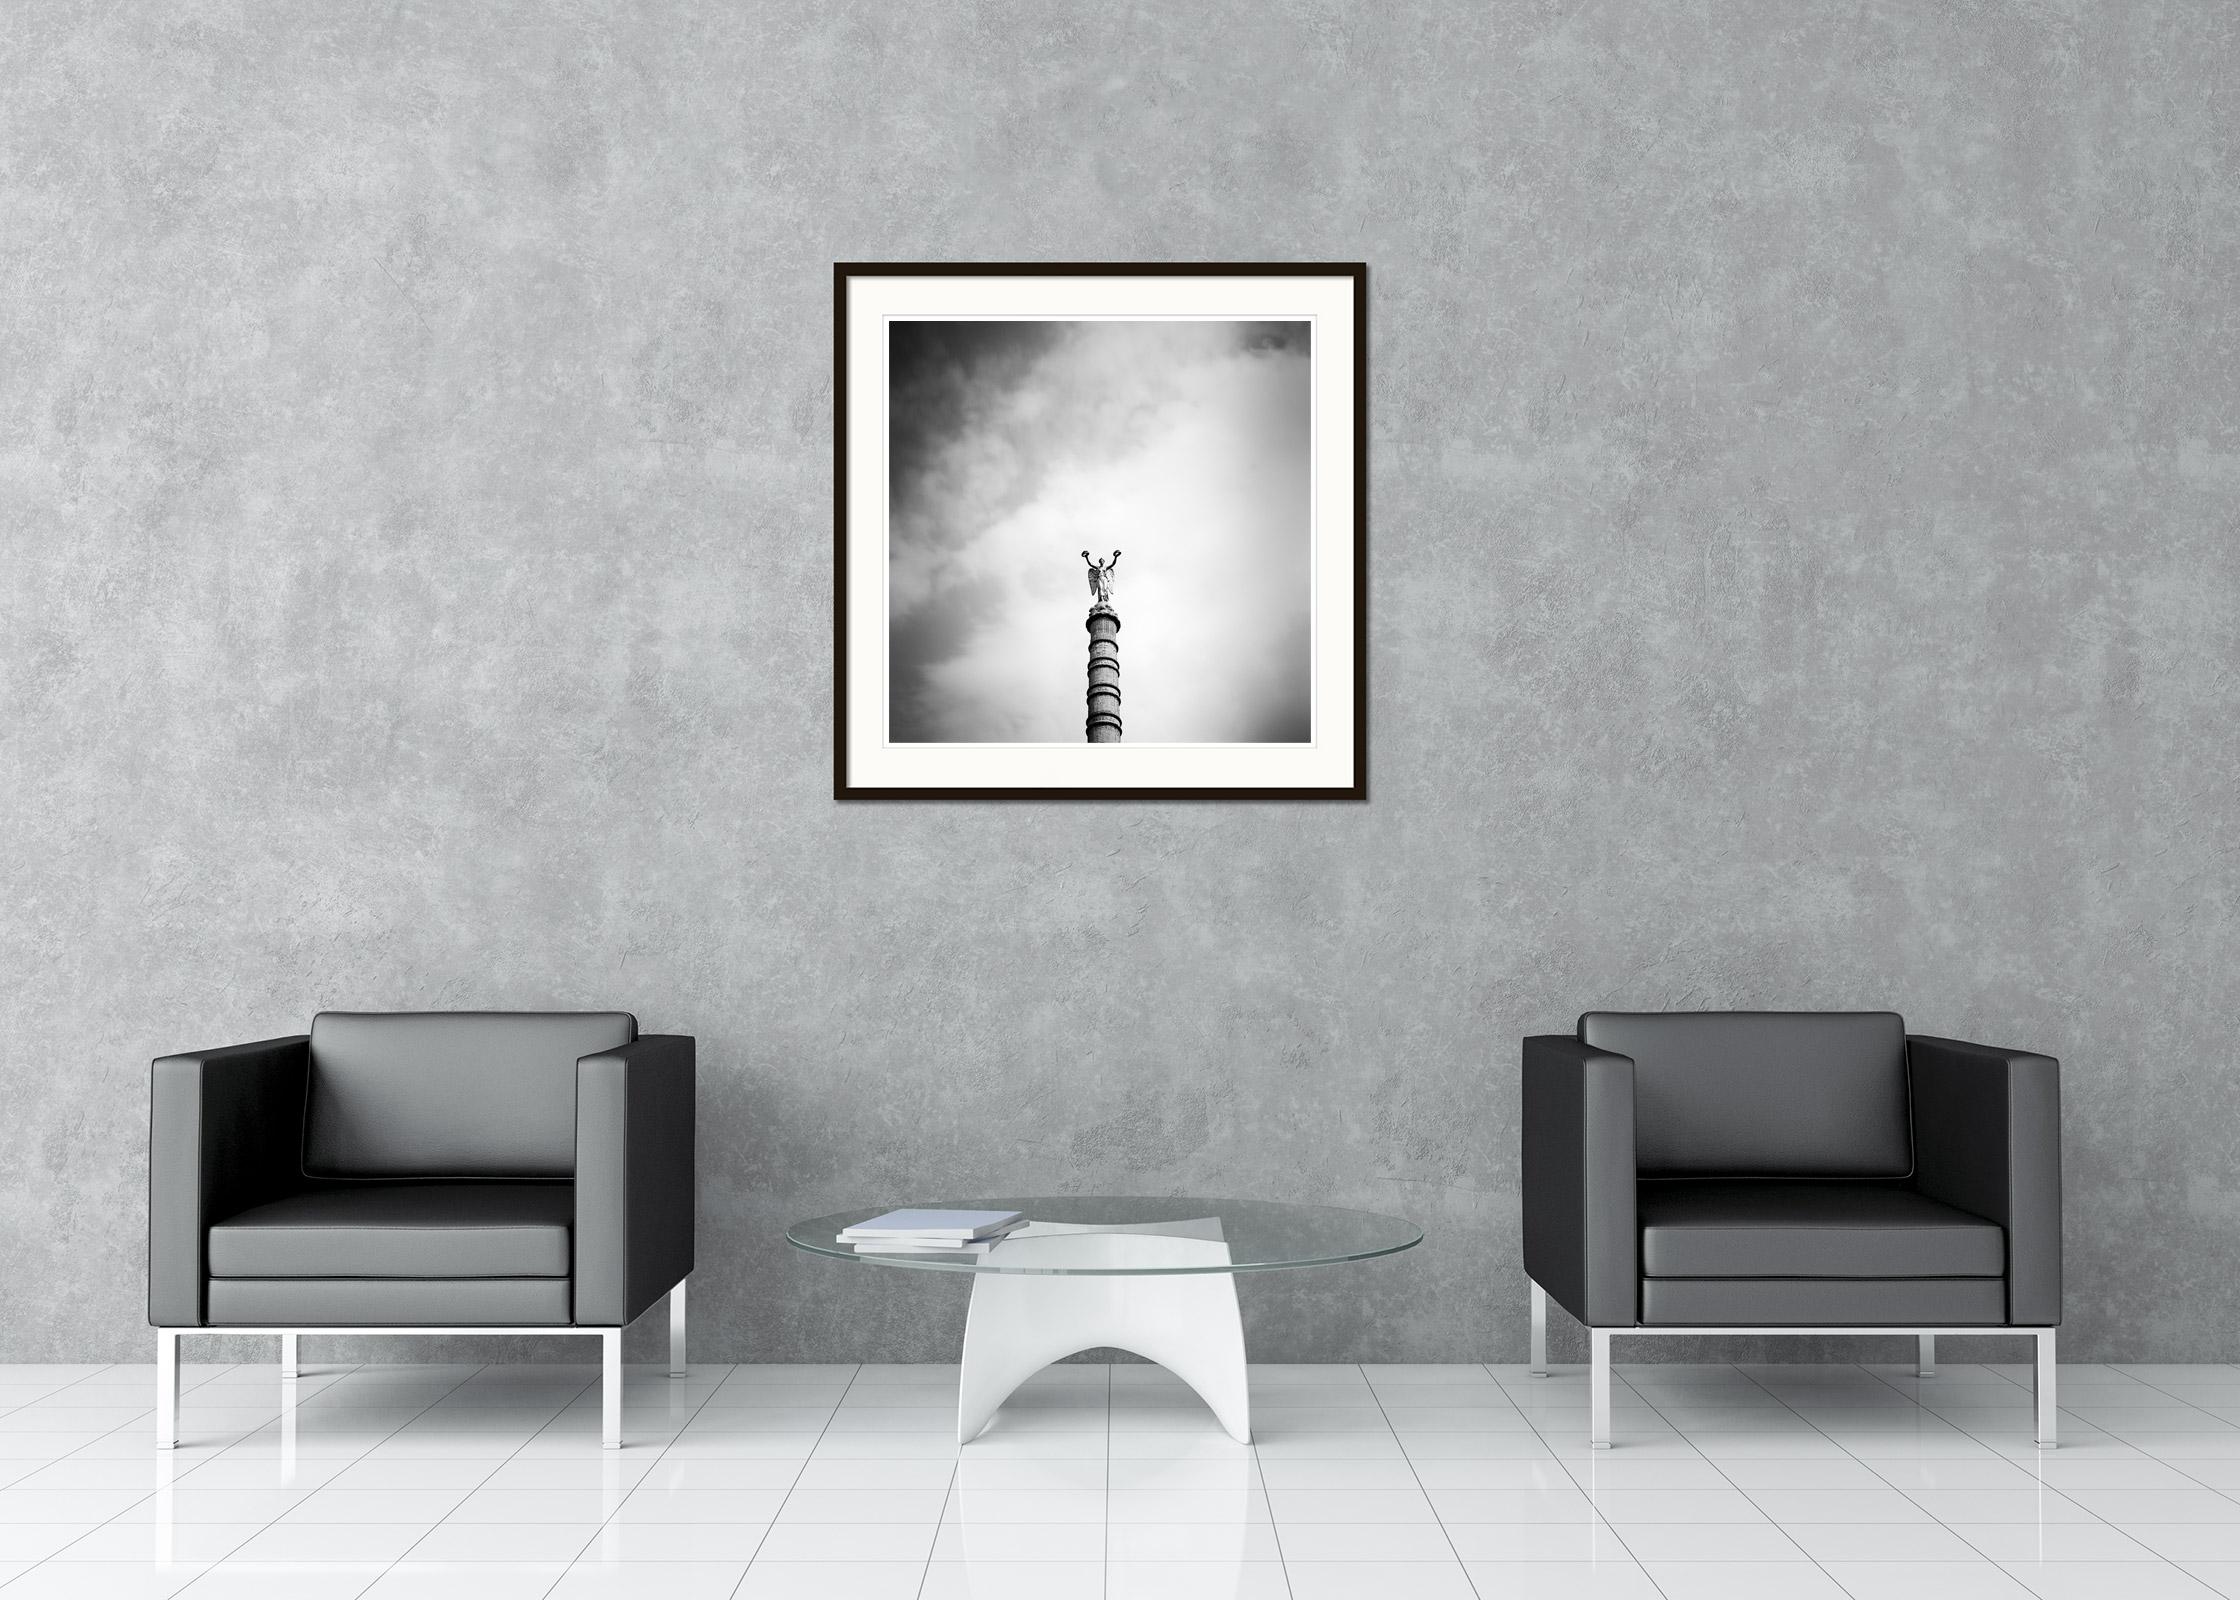 Black and white fine art cityscape - landscape photography. Archival pigment ink print as part of a limited edition of 9. All Gerald Berghammer prints are made to order in limited editions on Hahnemuehle Photo Rag Baryta. Each print is stamped on